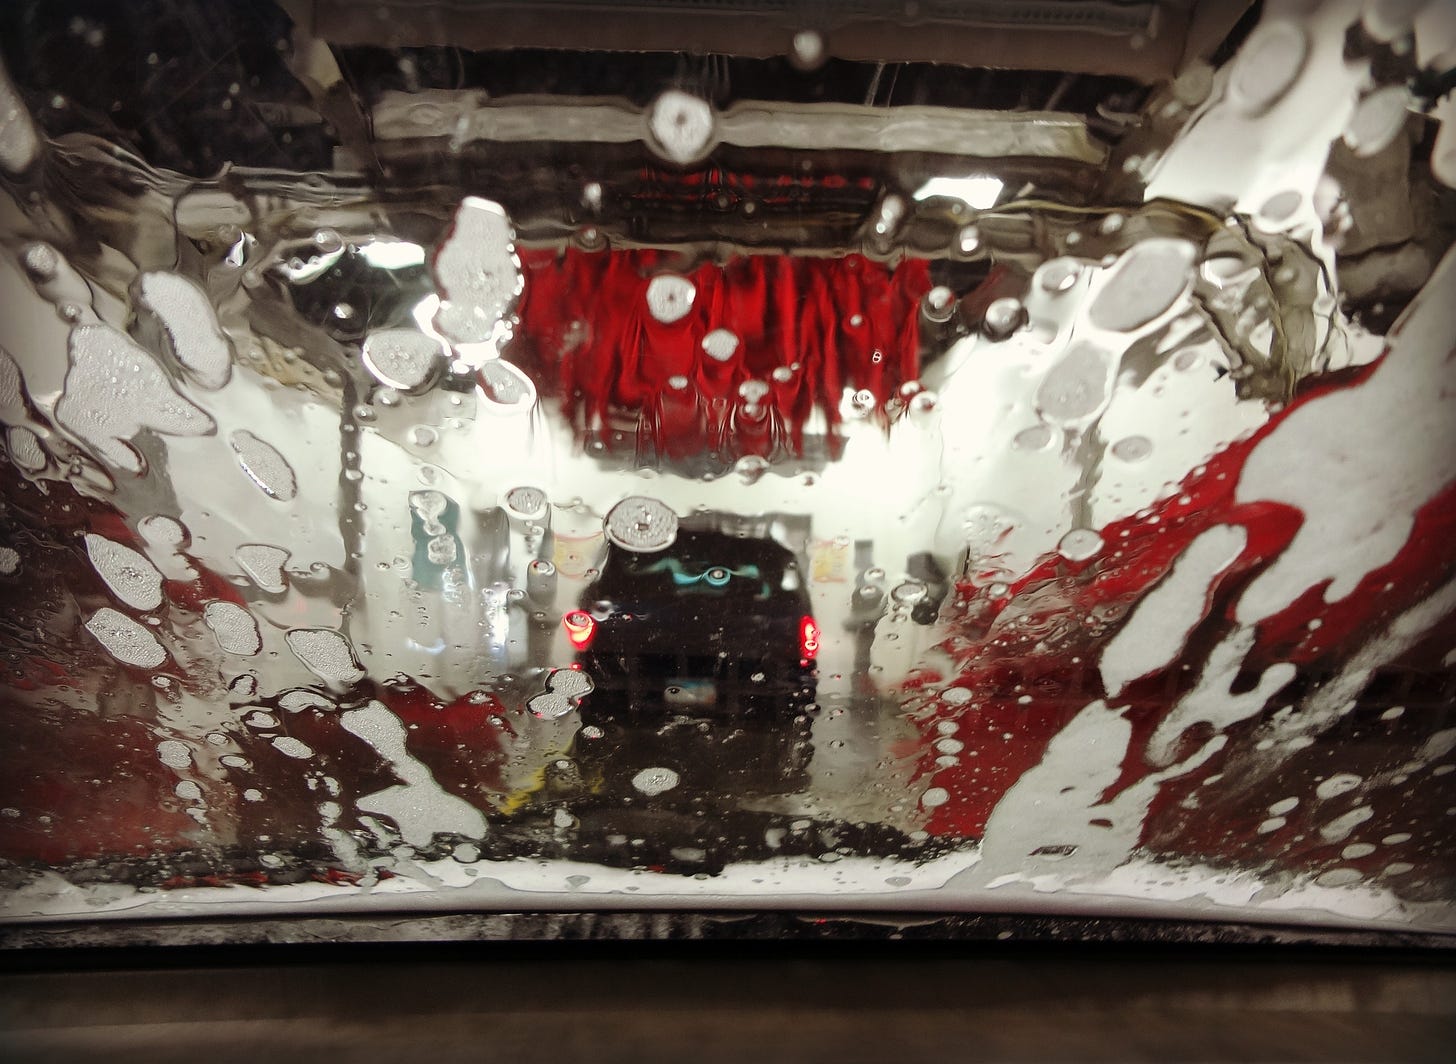 Sudsy water dripping down the windshield of a car in an automated car wash with red bristled brushes